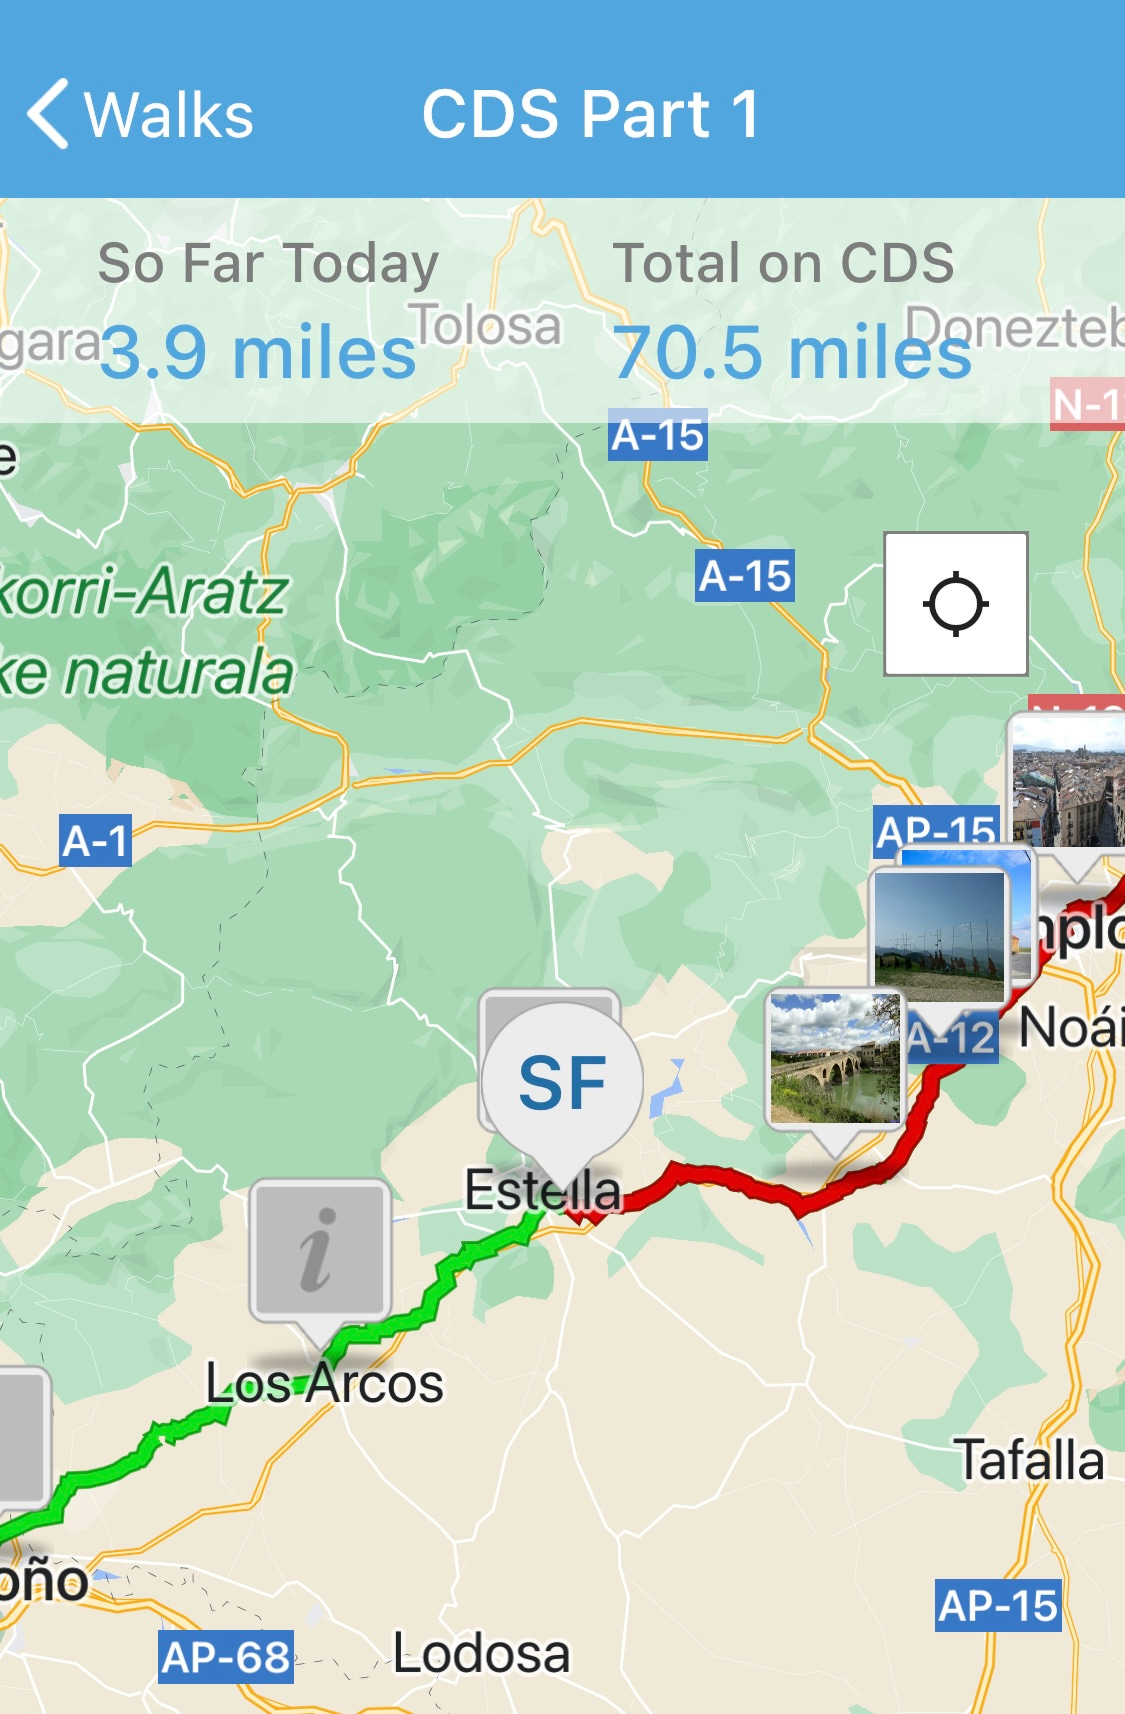 Screengrab from the Walk the Distance virtual walking app showing a map of the Camino de Santiago